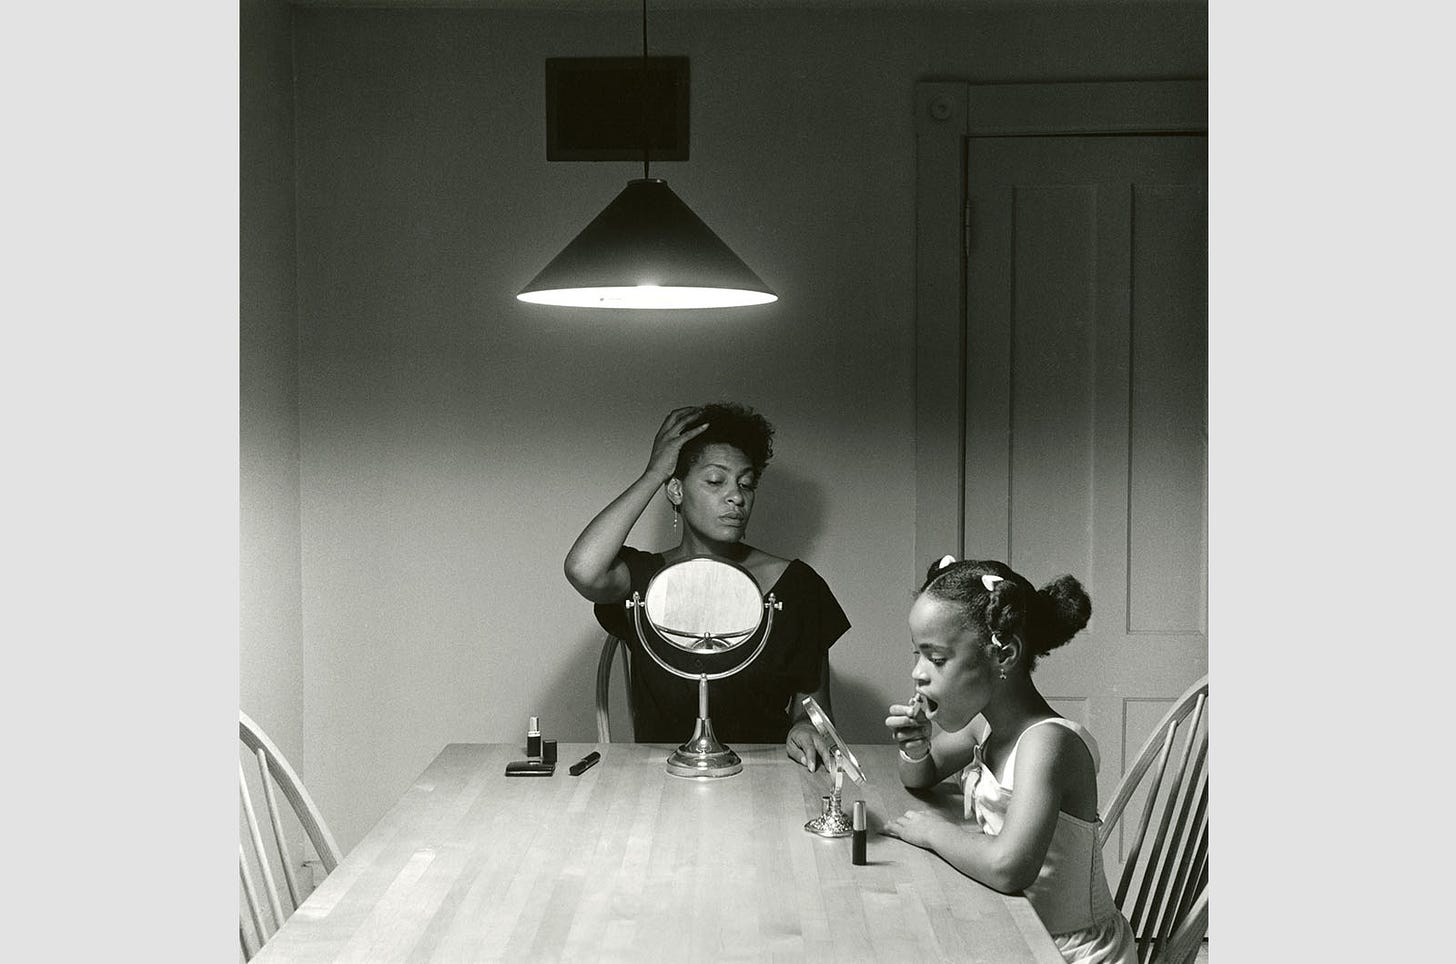 Carrie Mae Weems, Untitled (Putting on make up)